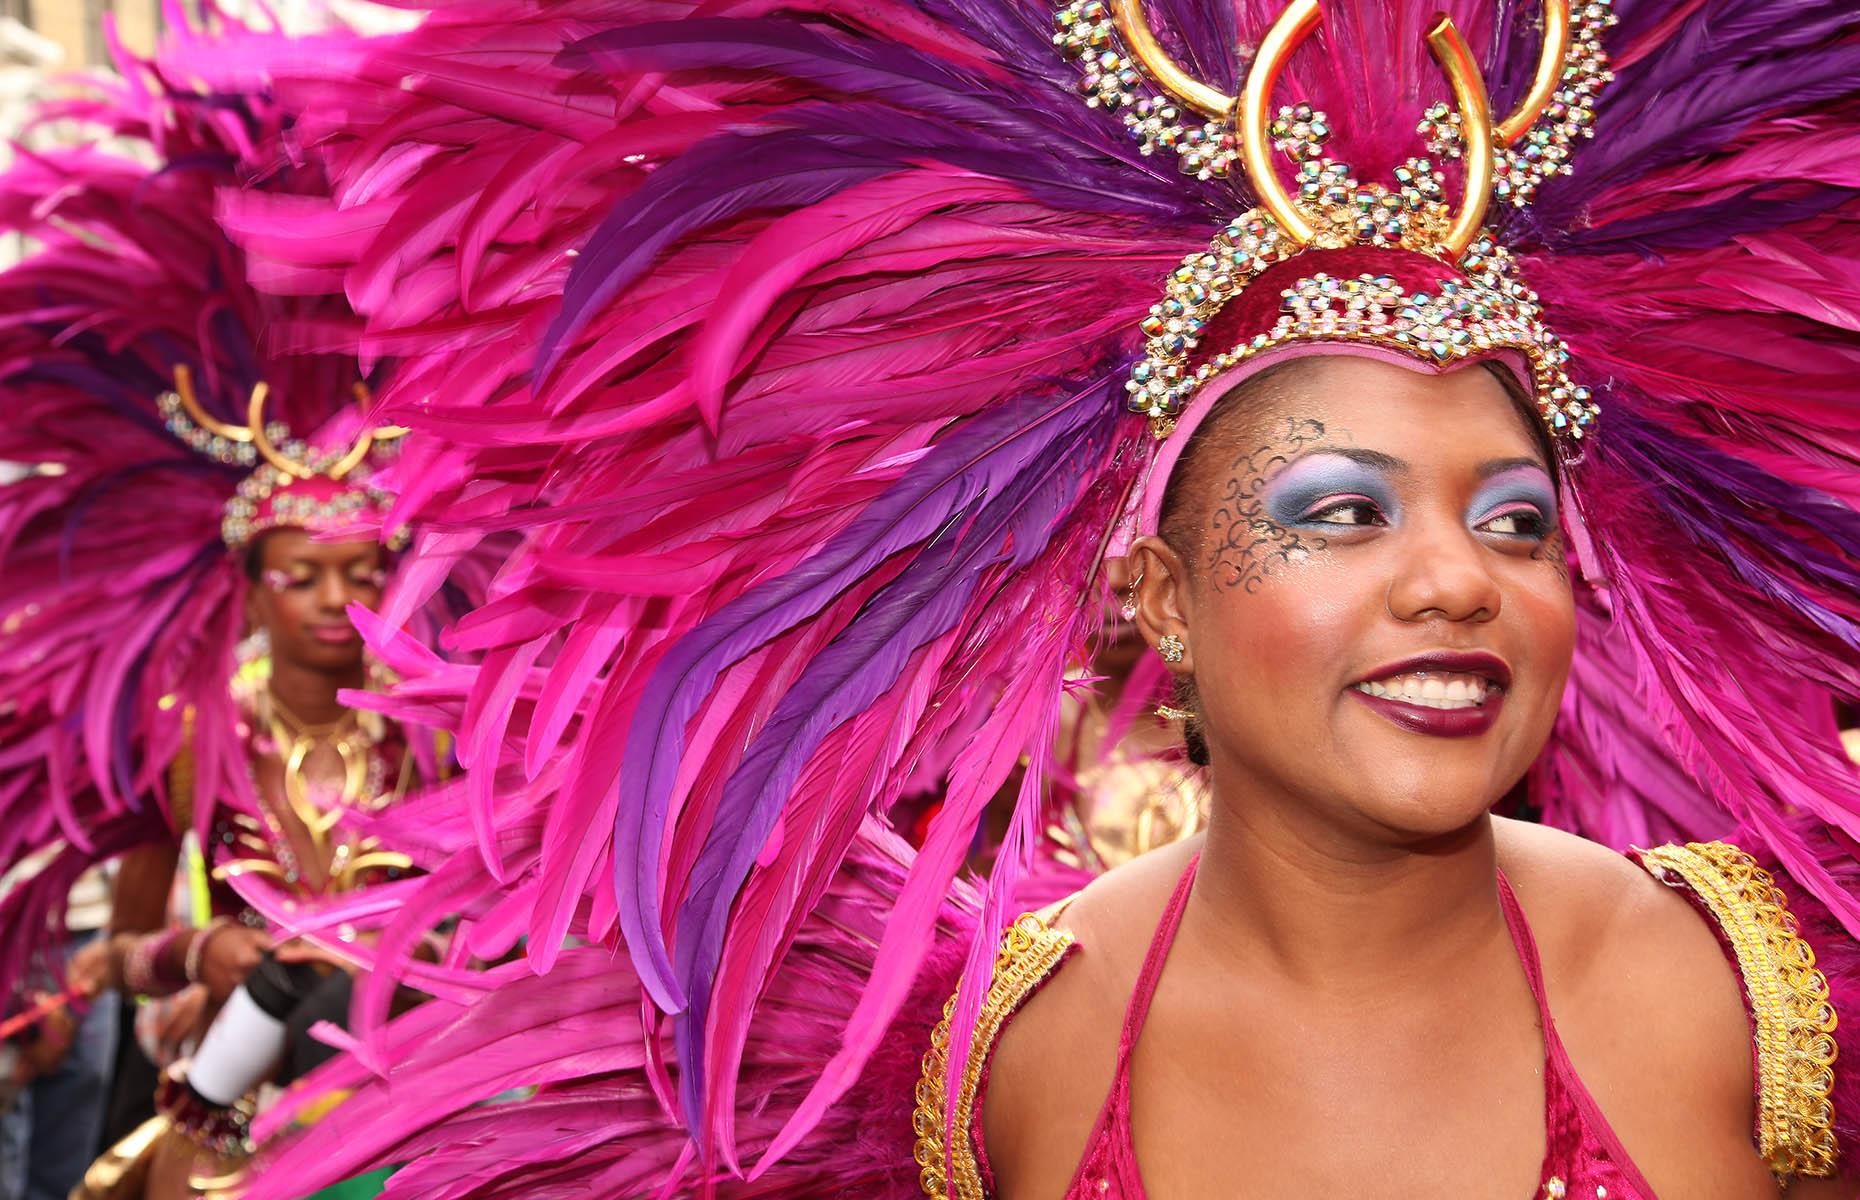 <p>The Trinidad and Tobago Carnival originated during the time of slavery. Banned from attending their masters’ parties and masquerades, they held their own costumed events which ended up being much more fun anyway. Today it is regarded as one of the greatest street parades in the world, turning the streets of Port of Spain into a cavalcade of color and sound on the Monday and Tuesday before Ash Wednesday. When the dancers parade through the streets in all their glittering finery, there is no more beautiful sight in the Caribbean.</p>